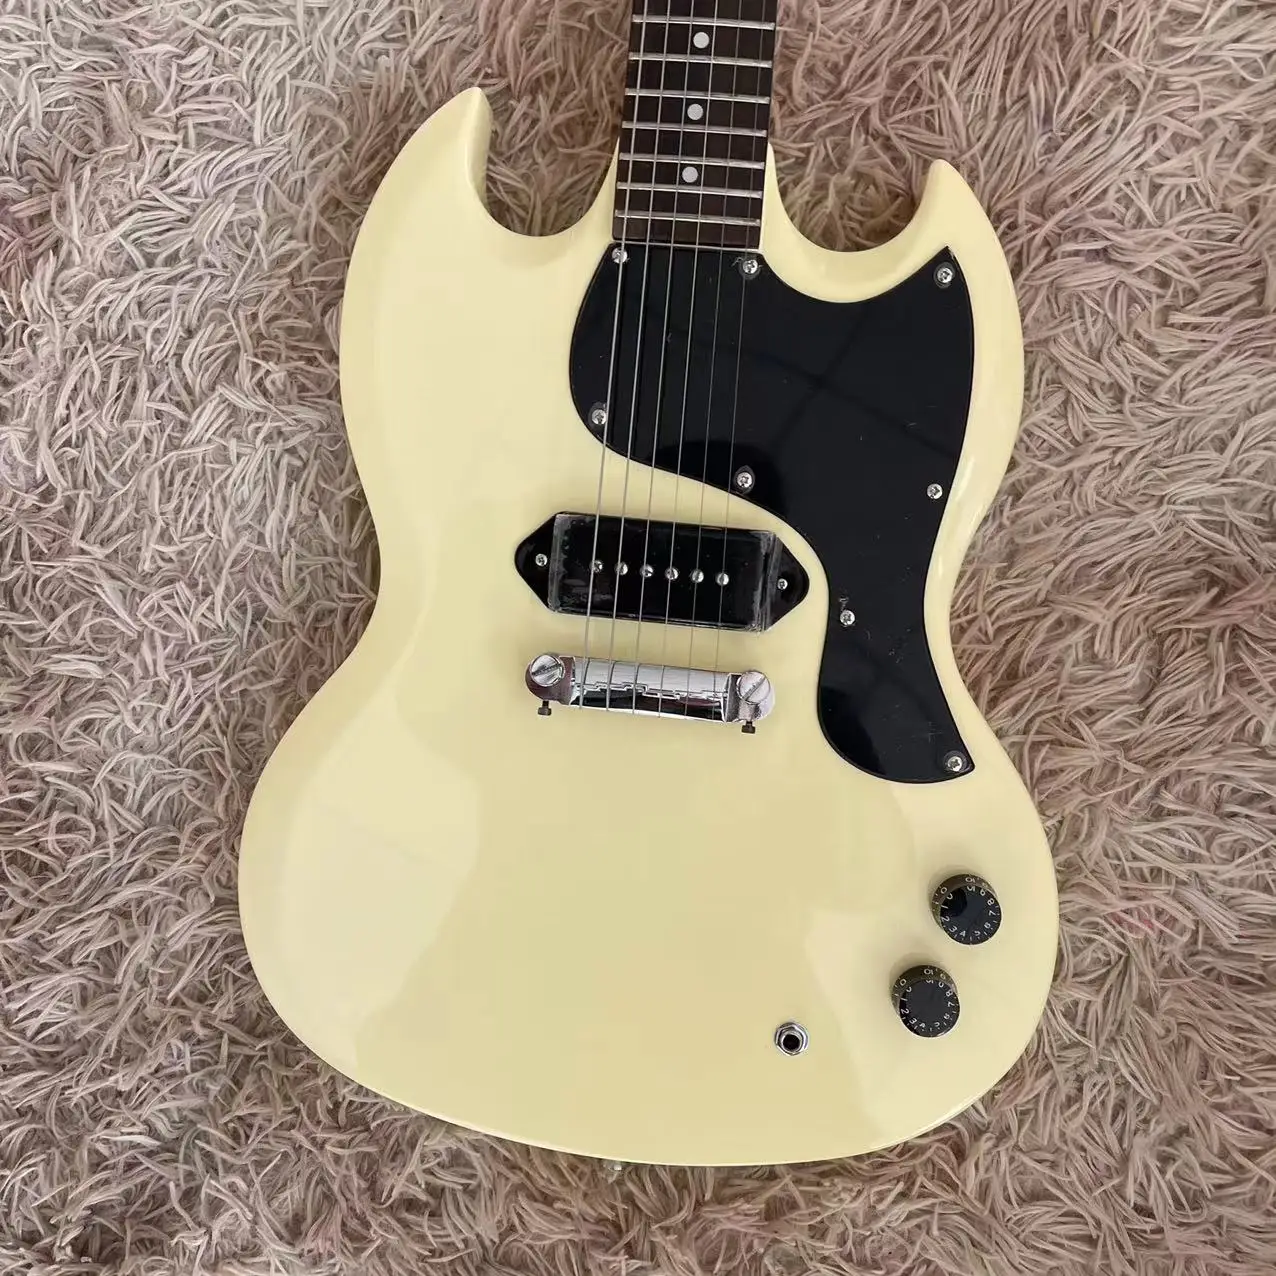 

SG all-in-one electric guitar, creamy yellow mahogany body, P90 pickup, inverted string bridge, black guard board, rosewood fing